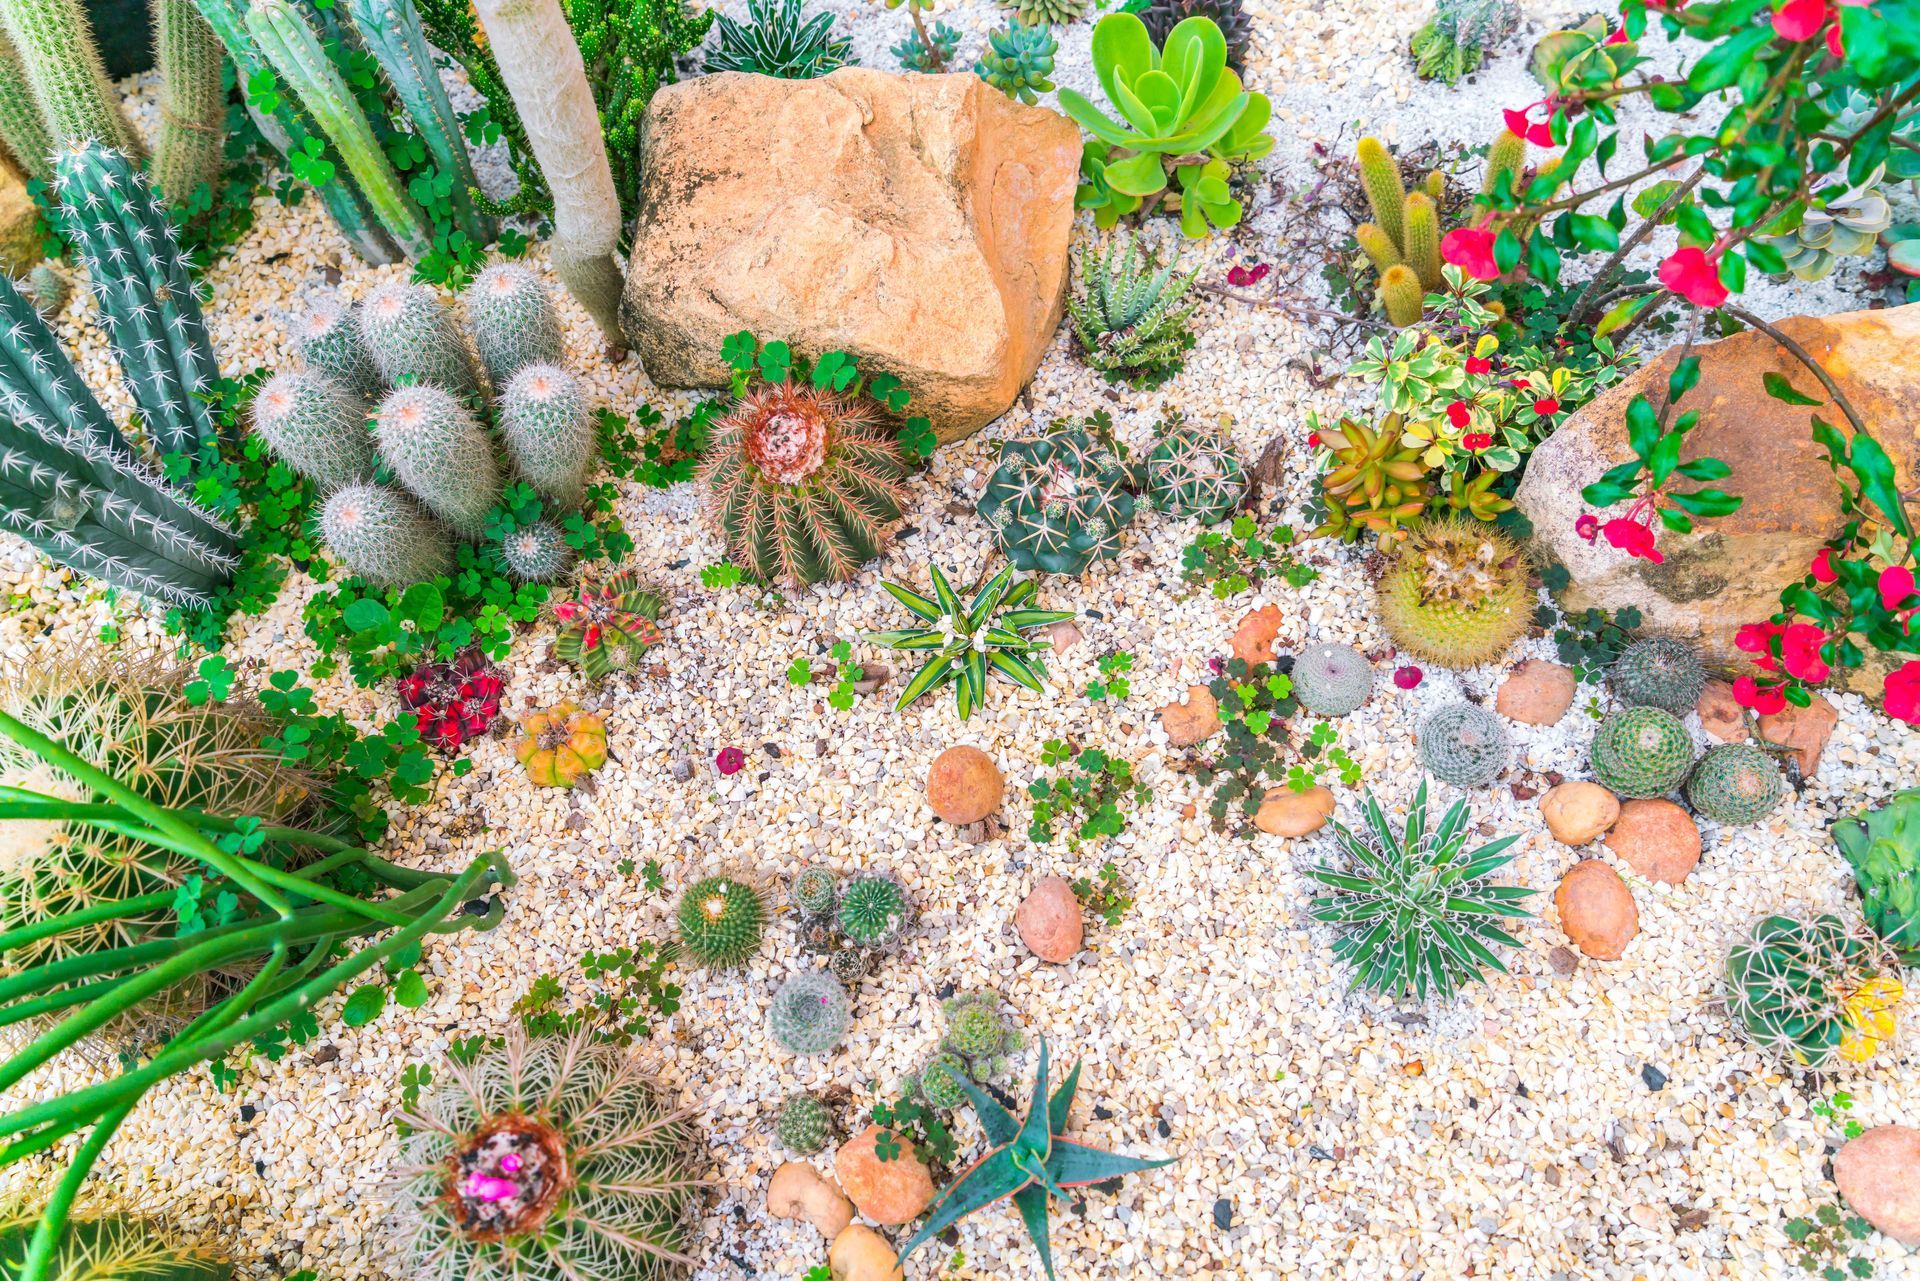 Affordable Drought Resistant Garden With Cacti And Succulents And Rocks